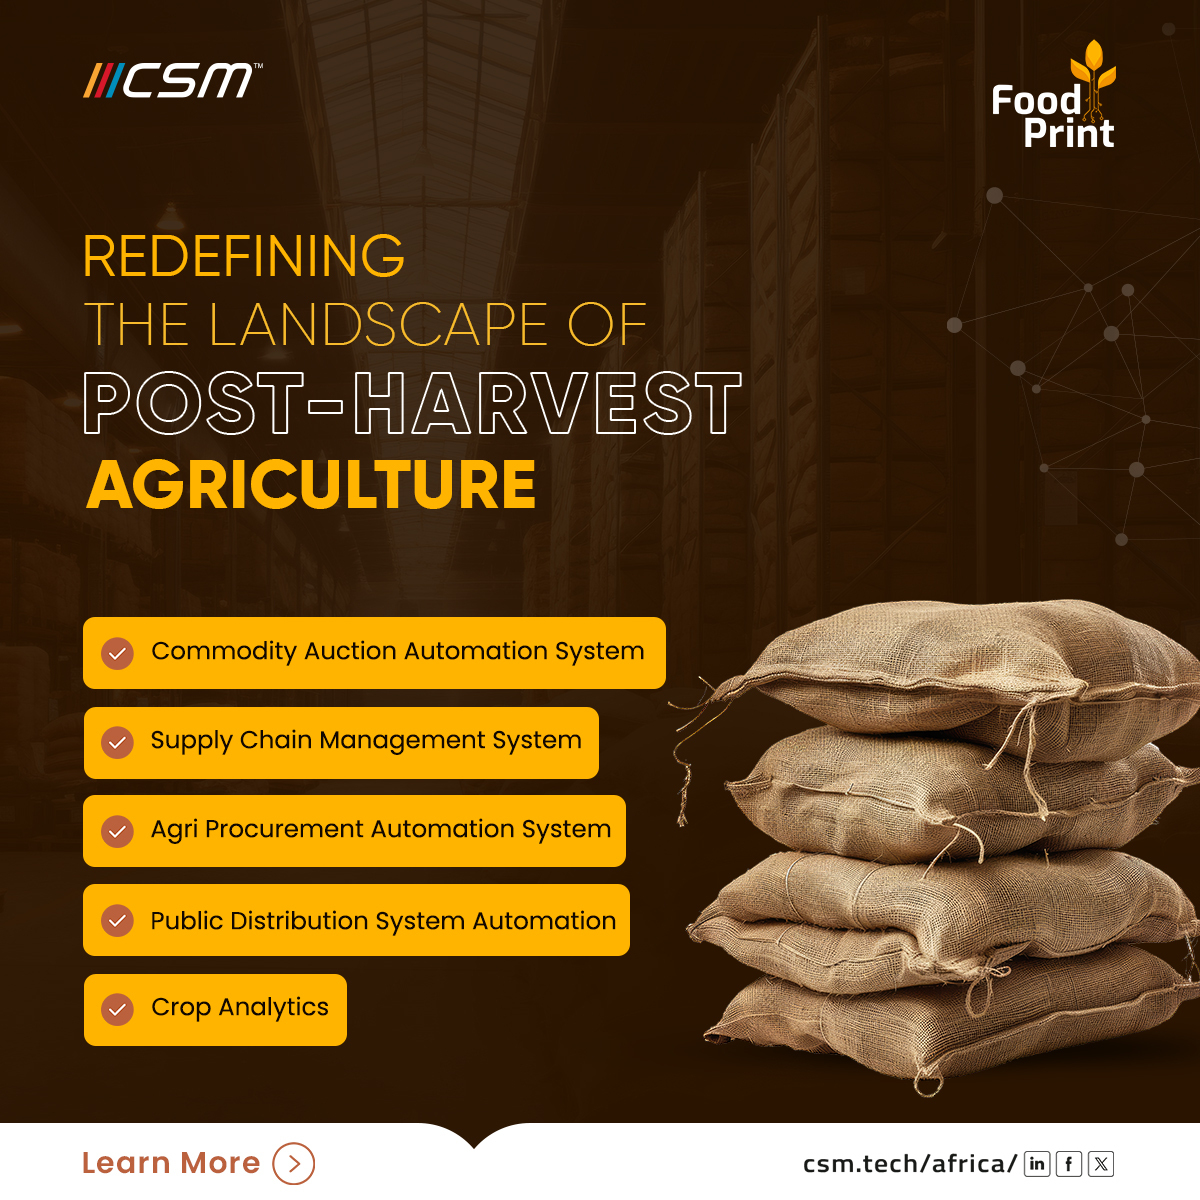 Revolutionizing agriculture, empowering farmers and ensuring food security for generations to come. 

👉Learn More: bit.ly/3GOY2NY 

#CSMTech #CSMTechAfrica #FoodSecurity #DigitalAgriculture #DigitalSolutions